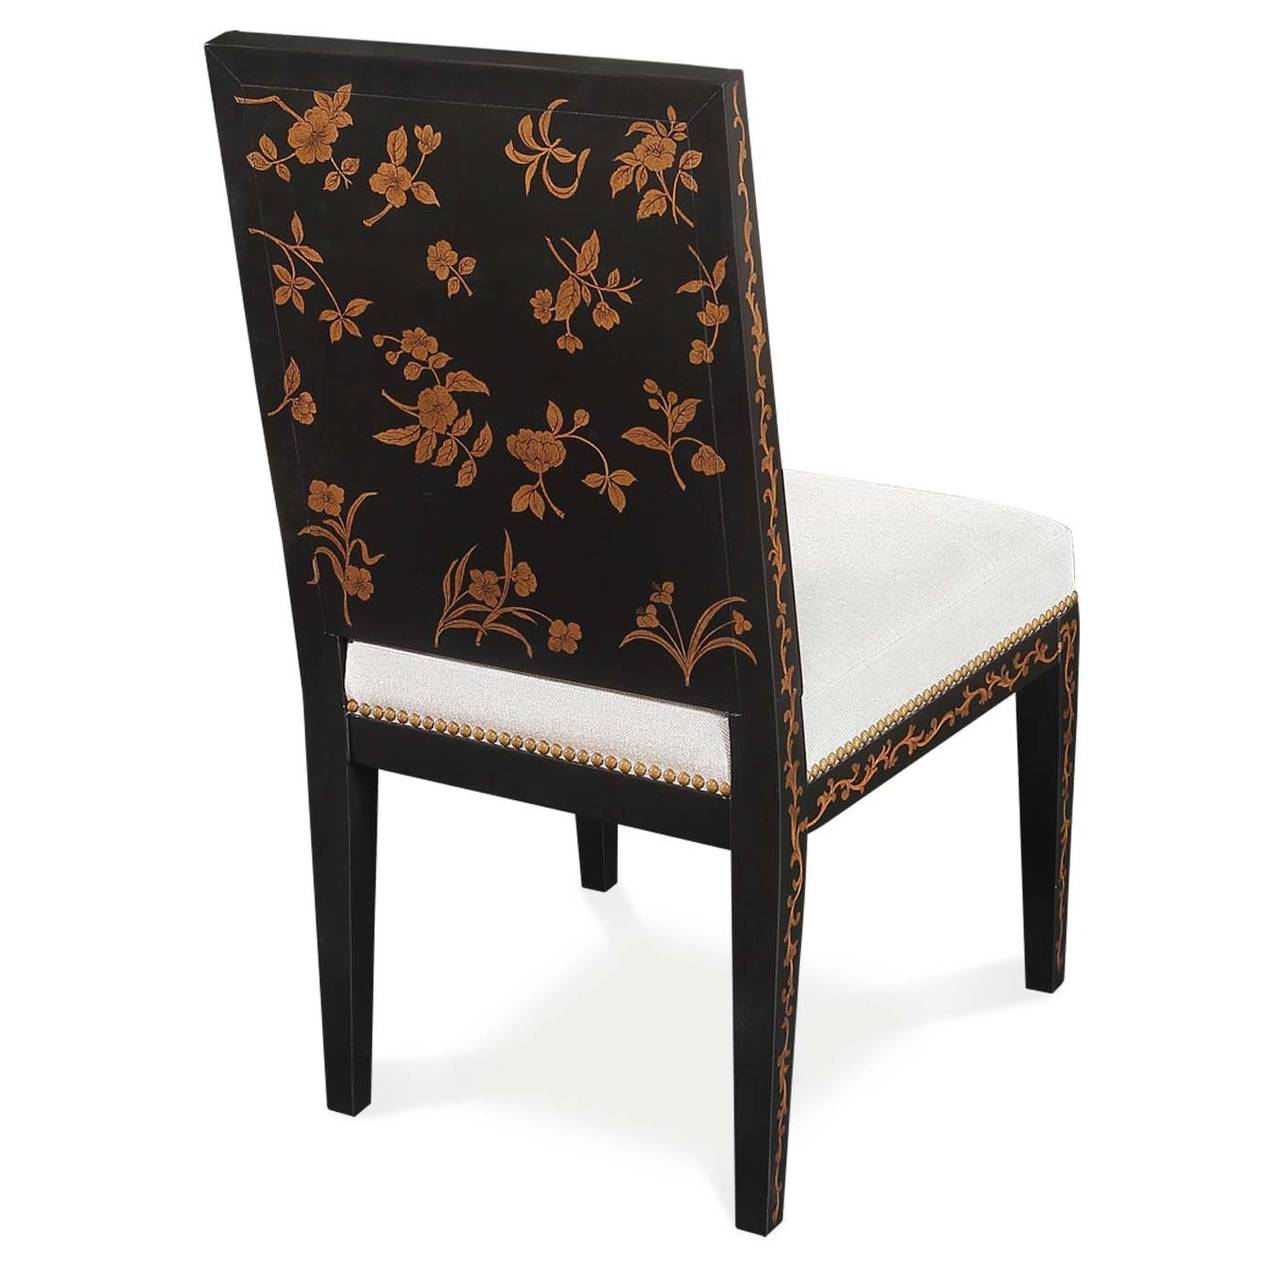 Handpainted by one of our best artist, this is a modern adaptation of an antique we found in Hong Kong. All of our Dining Chairs are hand crafted with tied straps and springs to insure comfort. Base colours can be changed to fit your decor, slight